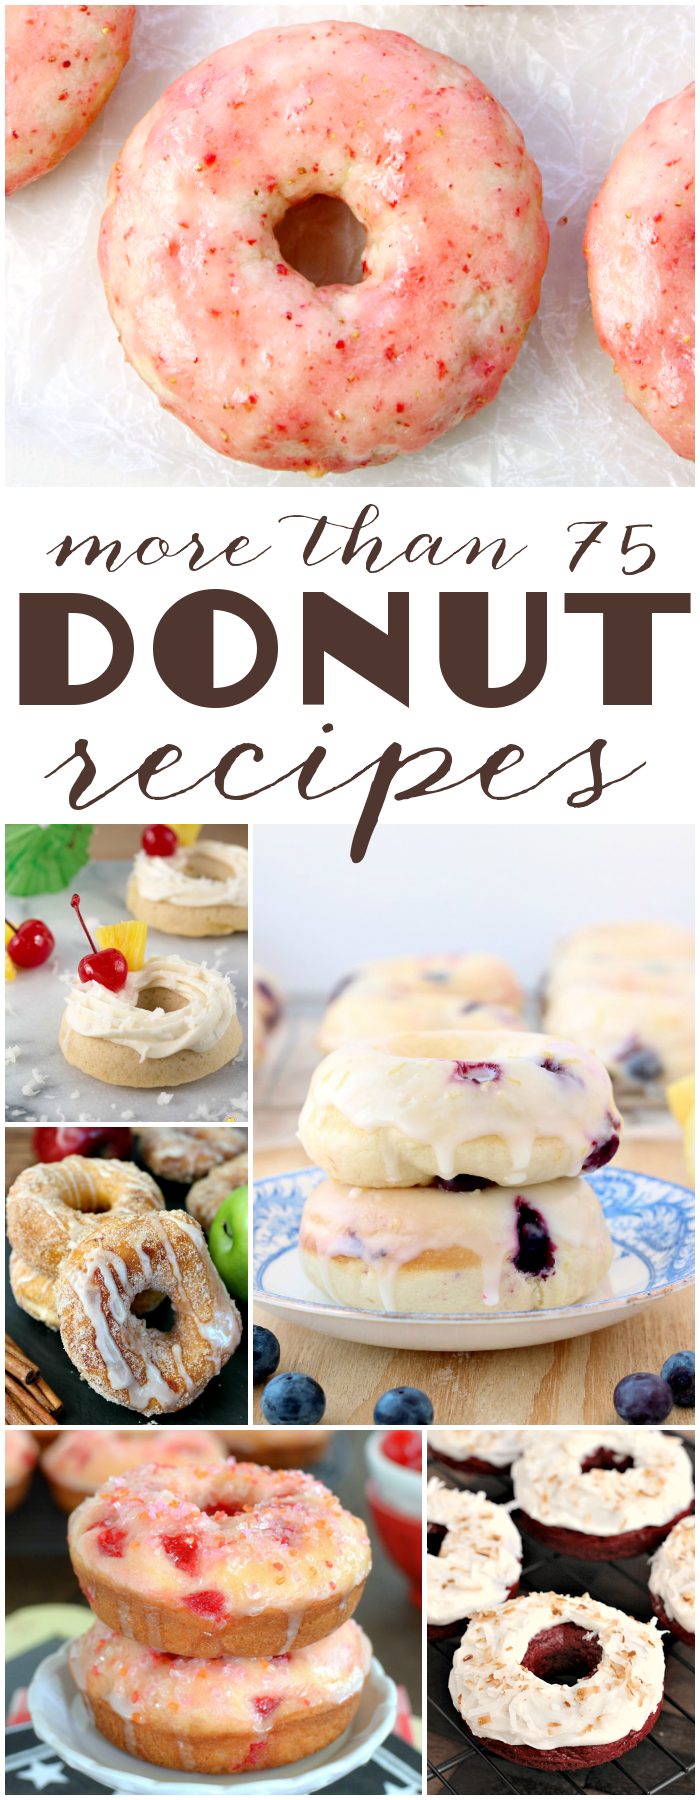 more than 75 donut recipes!